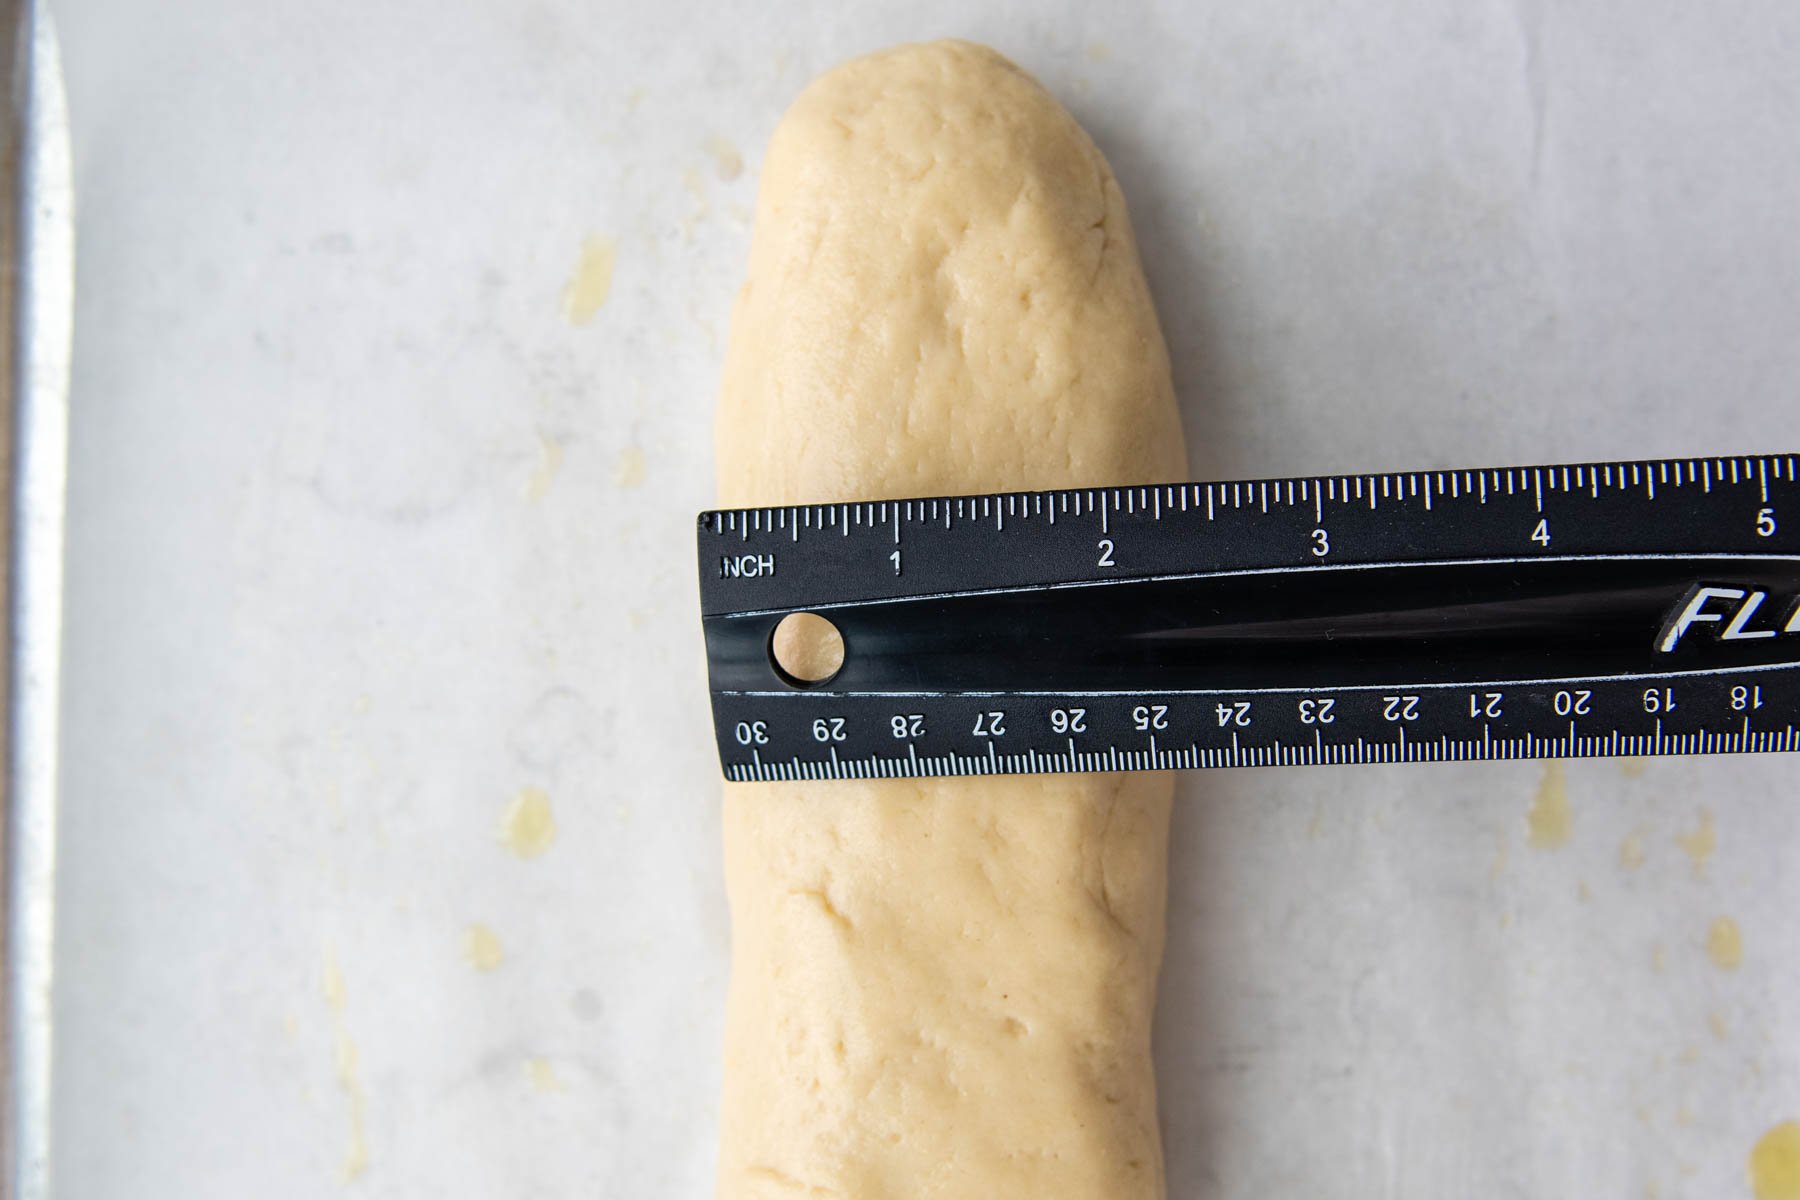 a ruler measuring the width of the shaped dough.